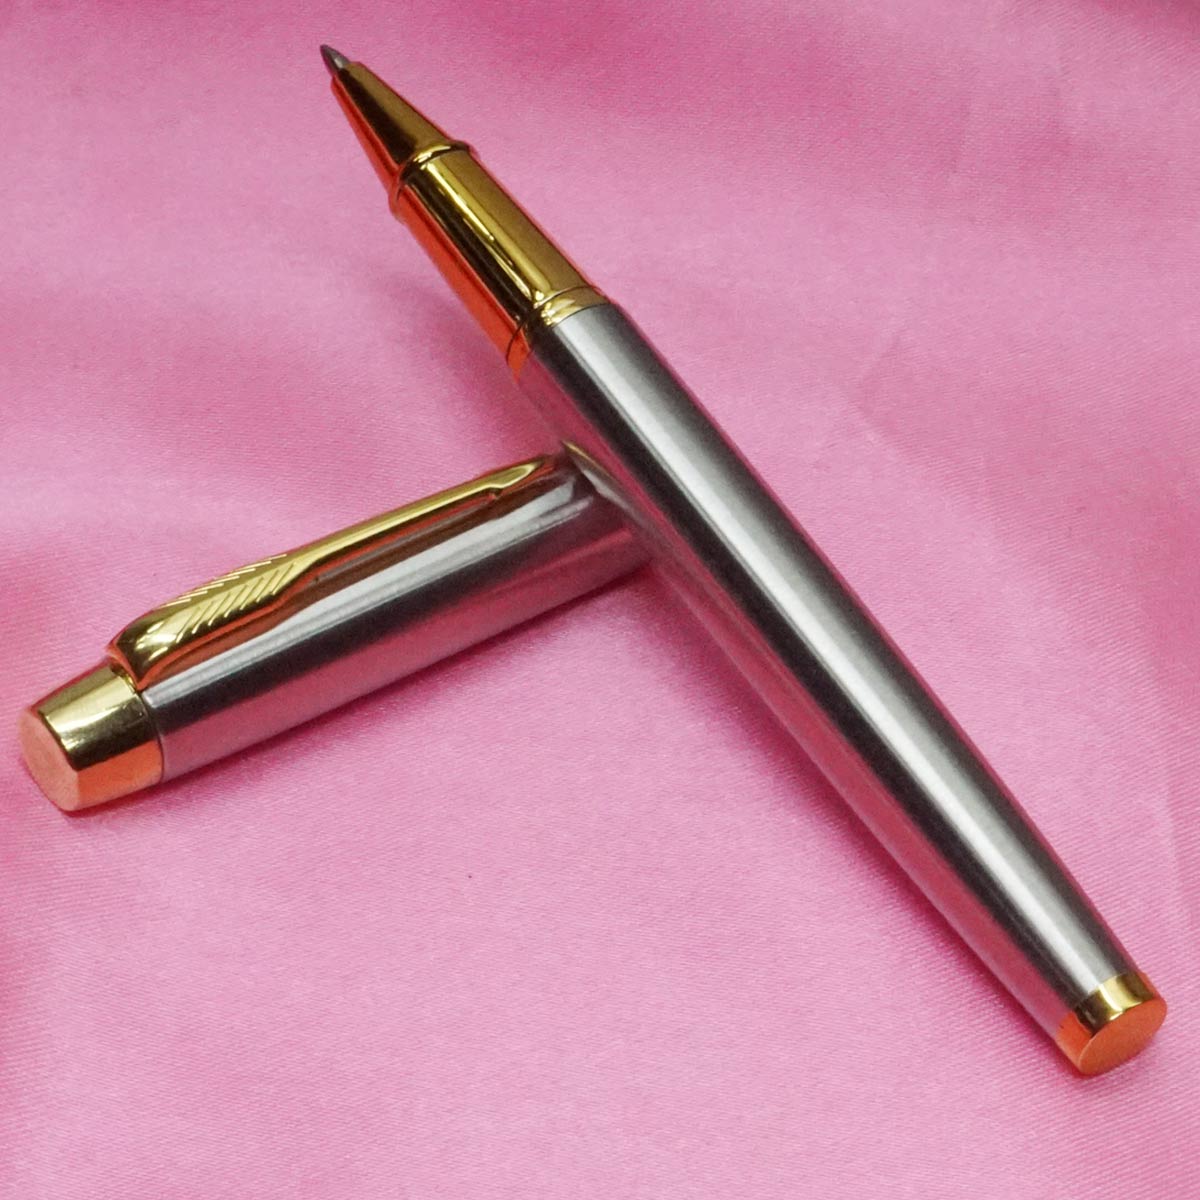 penhouse.in Glossy Finish Silver Color Body With Gold Trim Medium Tip Roller Ball Pen SKU 21476